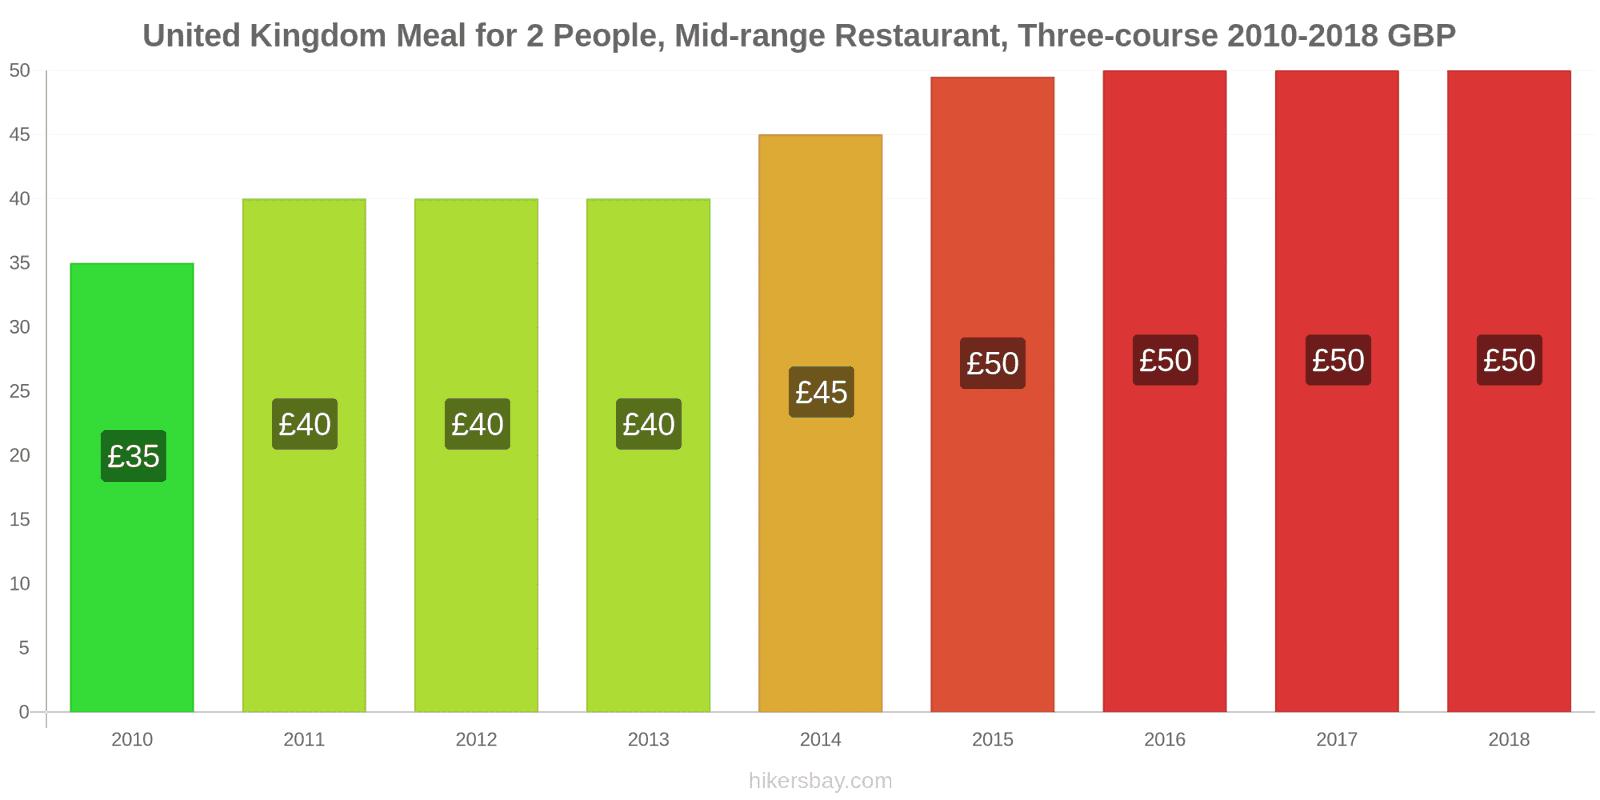 United Kingdom price changes Meal for 2 People, Mid-range Restaurant, Three-course hikersbay.com